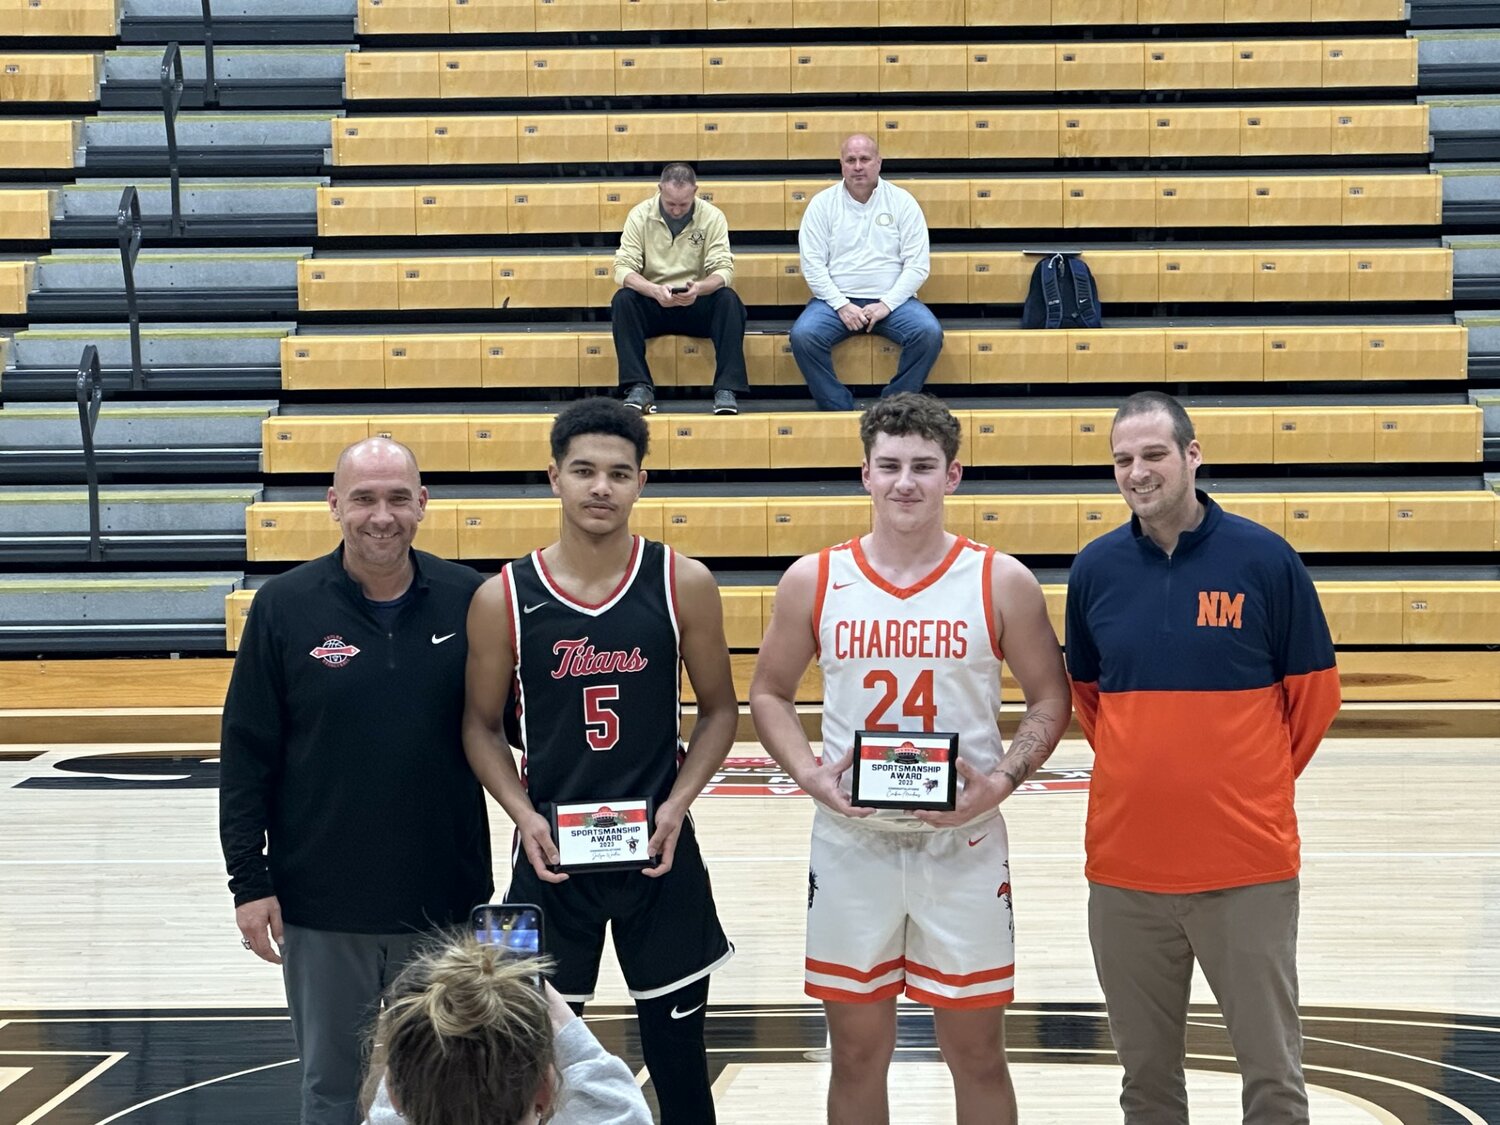 Corbin Meadows was presented with the sportsmanship award which is handed out to one player from each team.